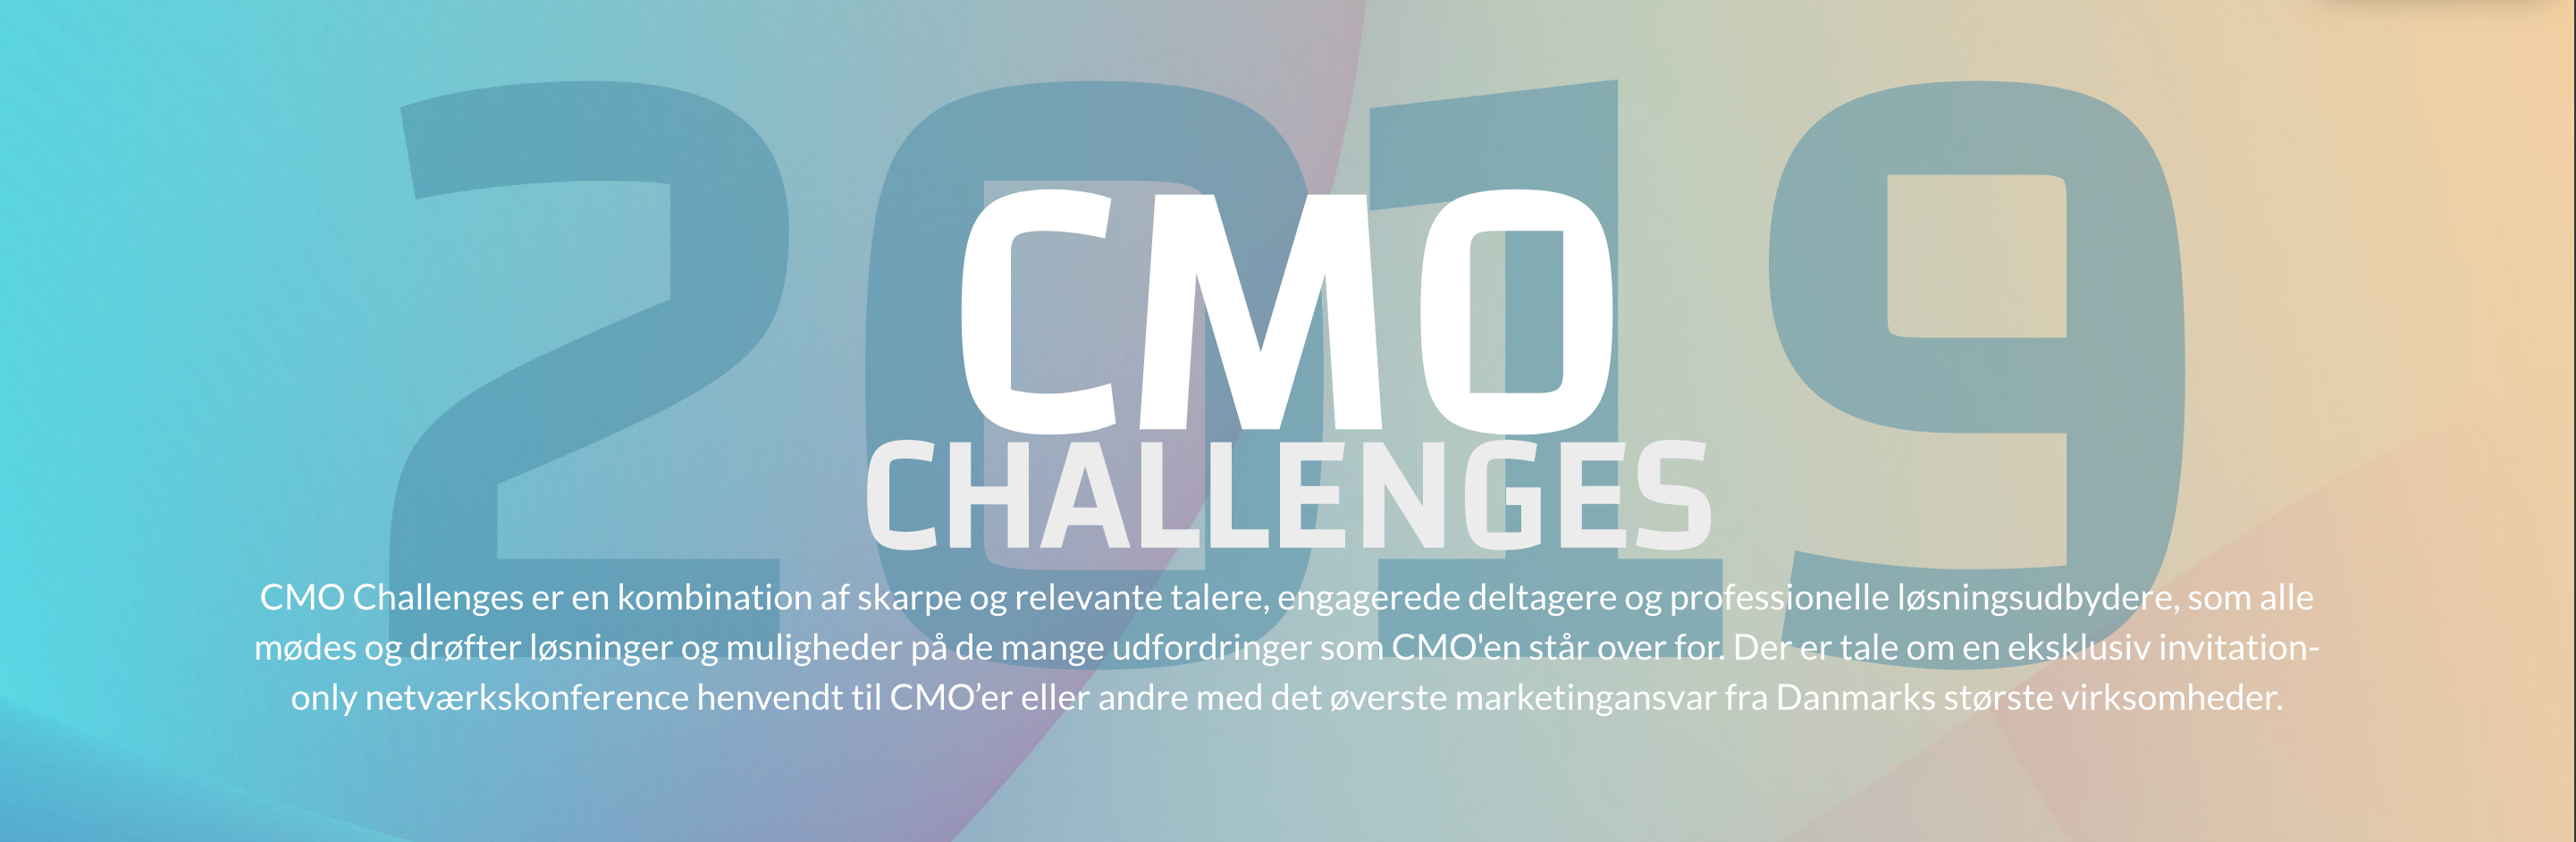 Sunrise to speak at CMO Challenges 2019: How to work with the customer journey